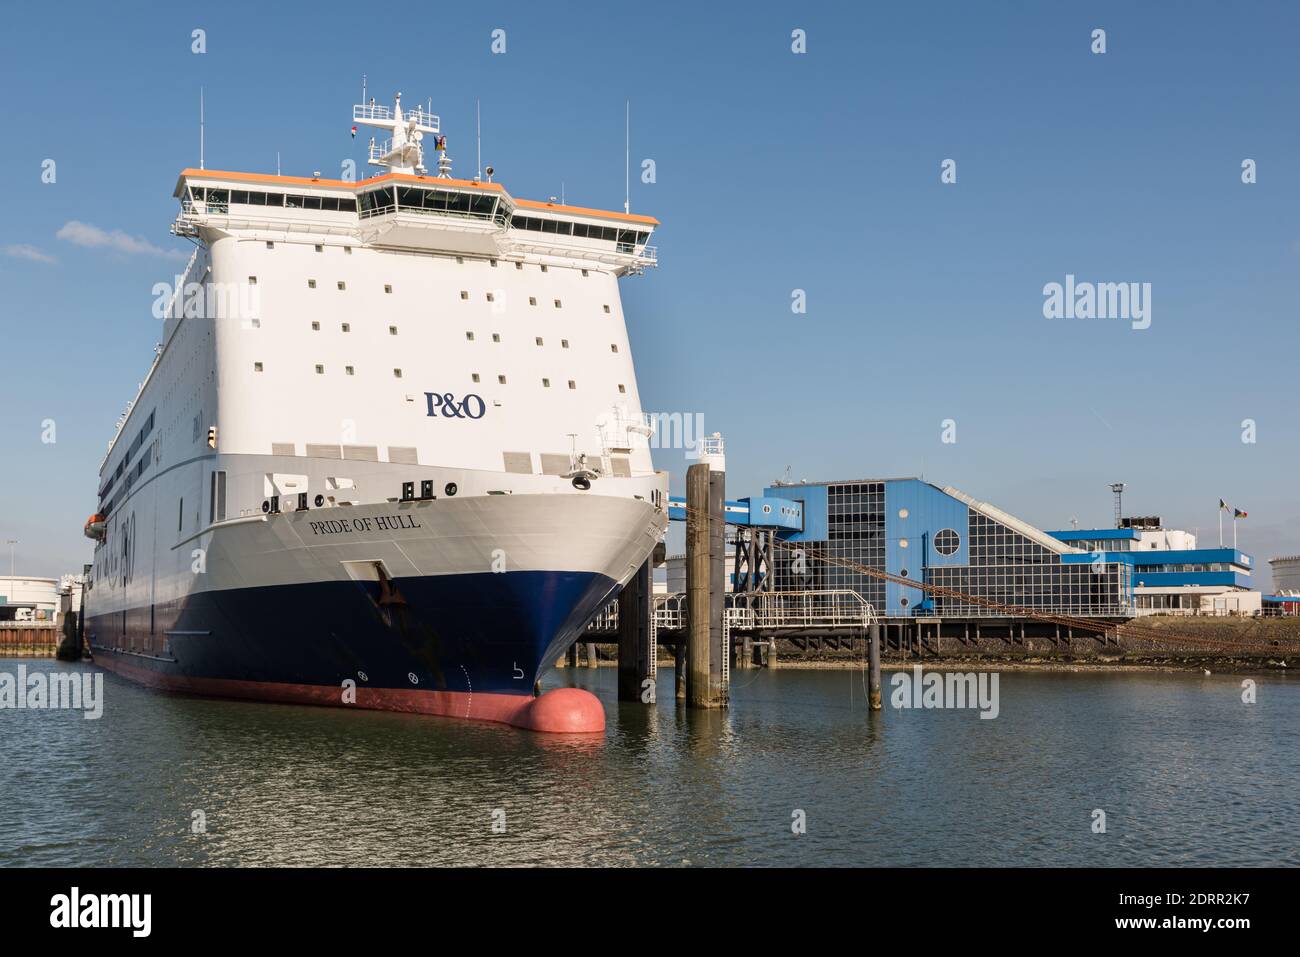 ROTTERDAM EUROPOORT, THE NETHERLANDS - FEBRUARY 29, 2016: The ferry Pride of Hull is moored at the terminal of P&O North Sea Ferries in Rotterdam Euro Stock Photo